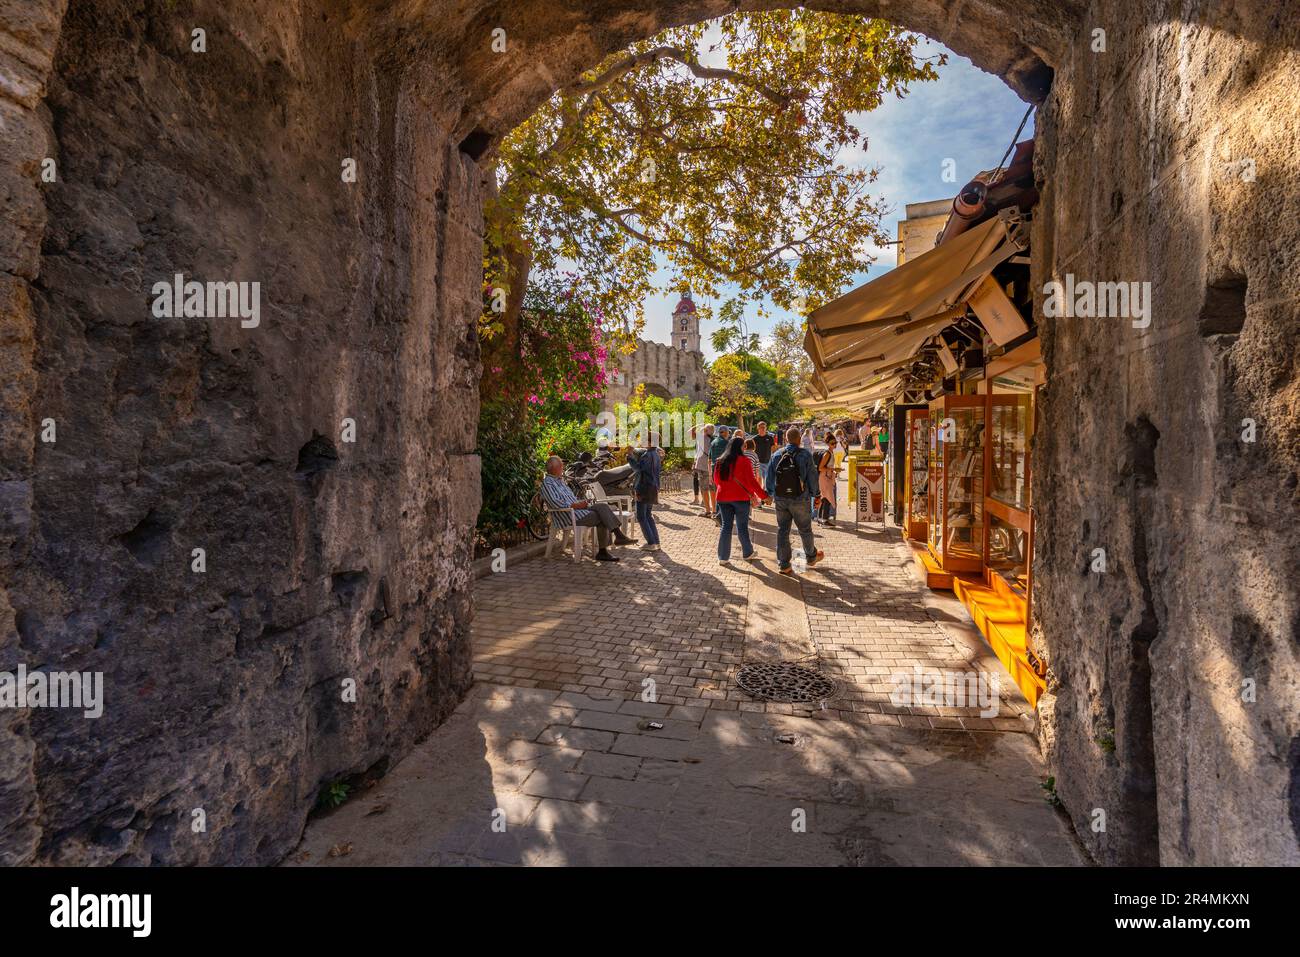 View of St. Anthony Gate, Old Rhodes Town, UNESCO World Heritage Site, Rhodes, Dodecanese, Greek Islands, Greece, Europe Stock Photo